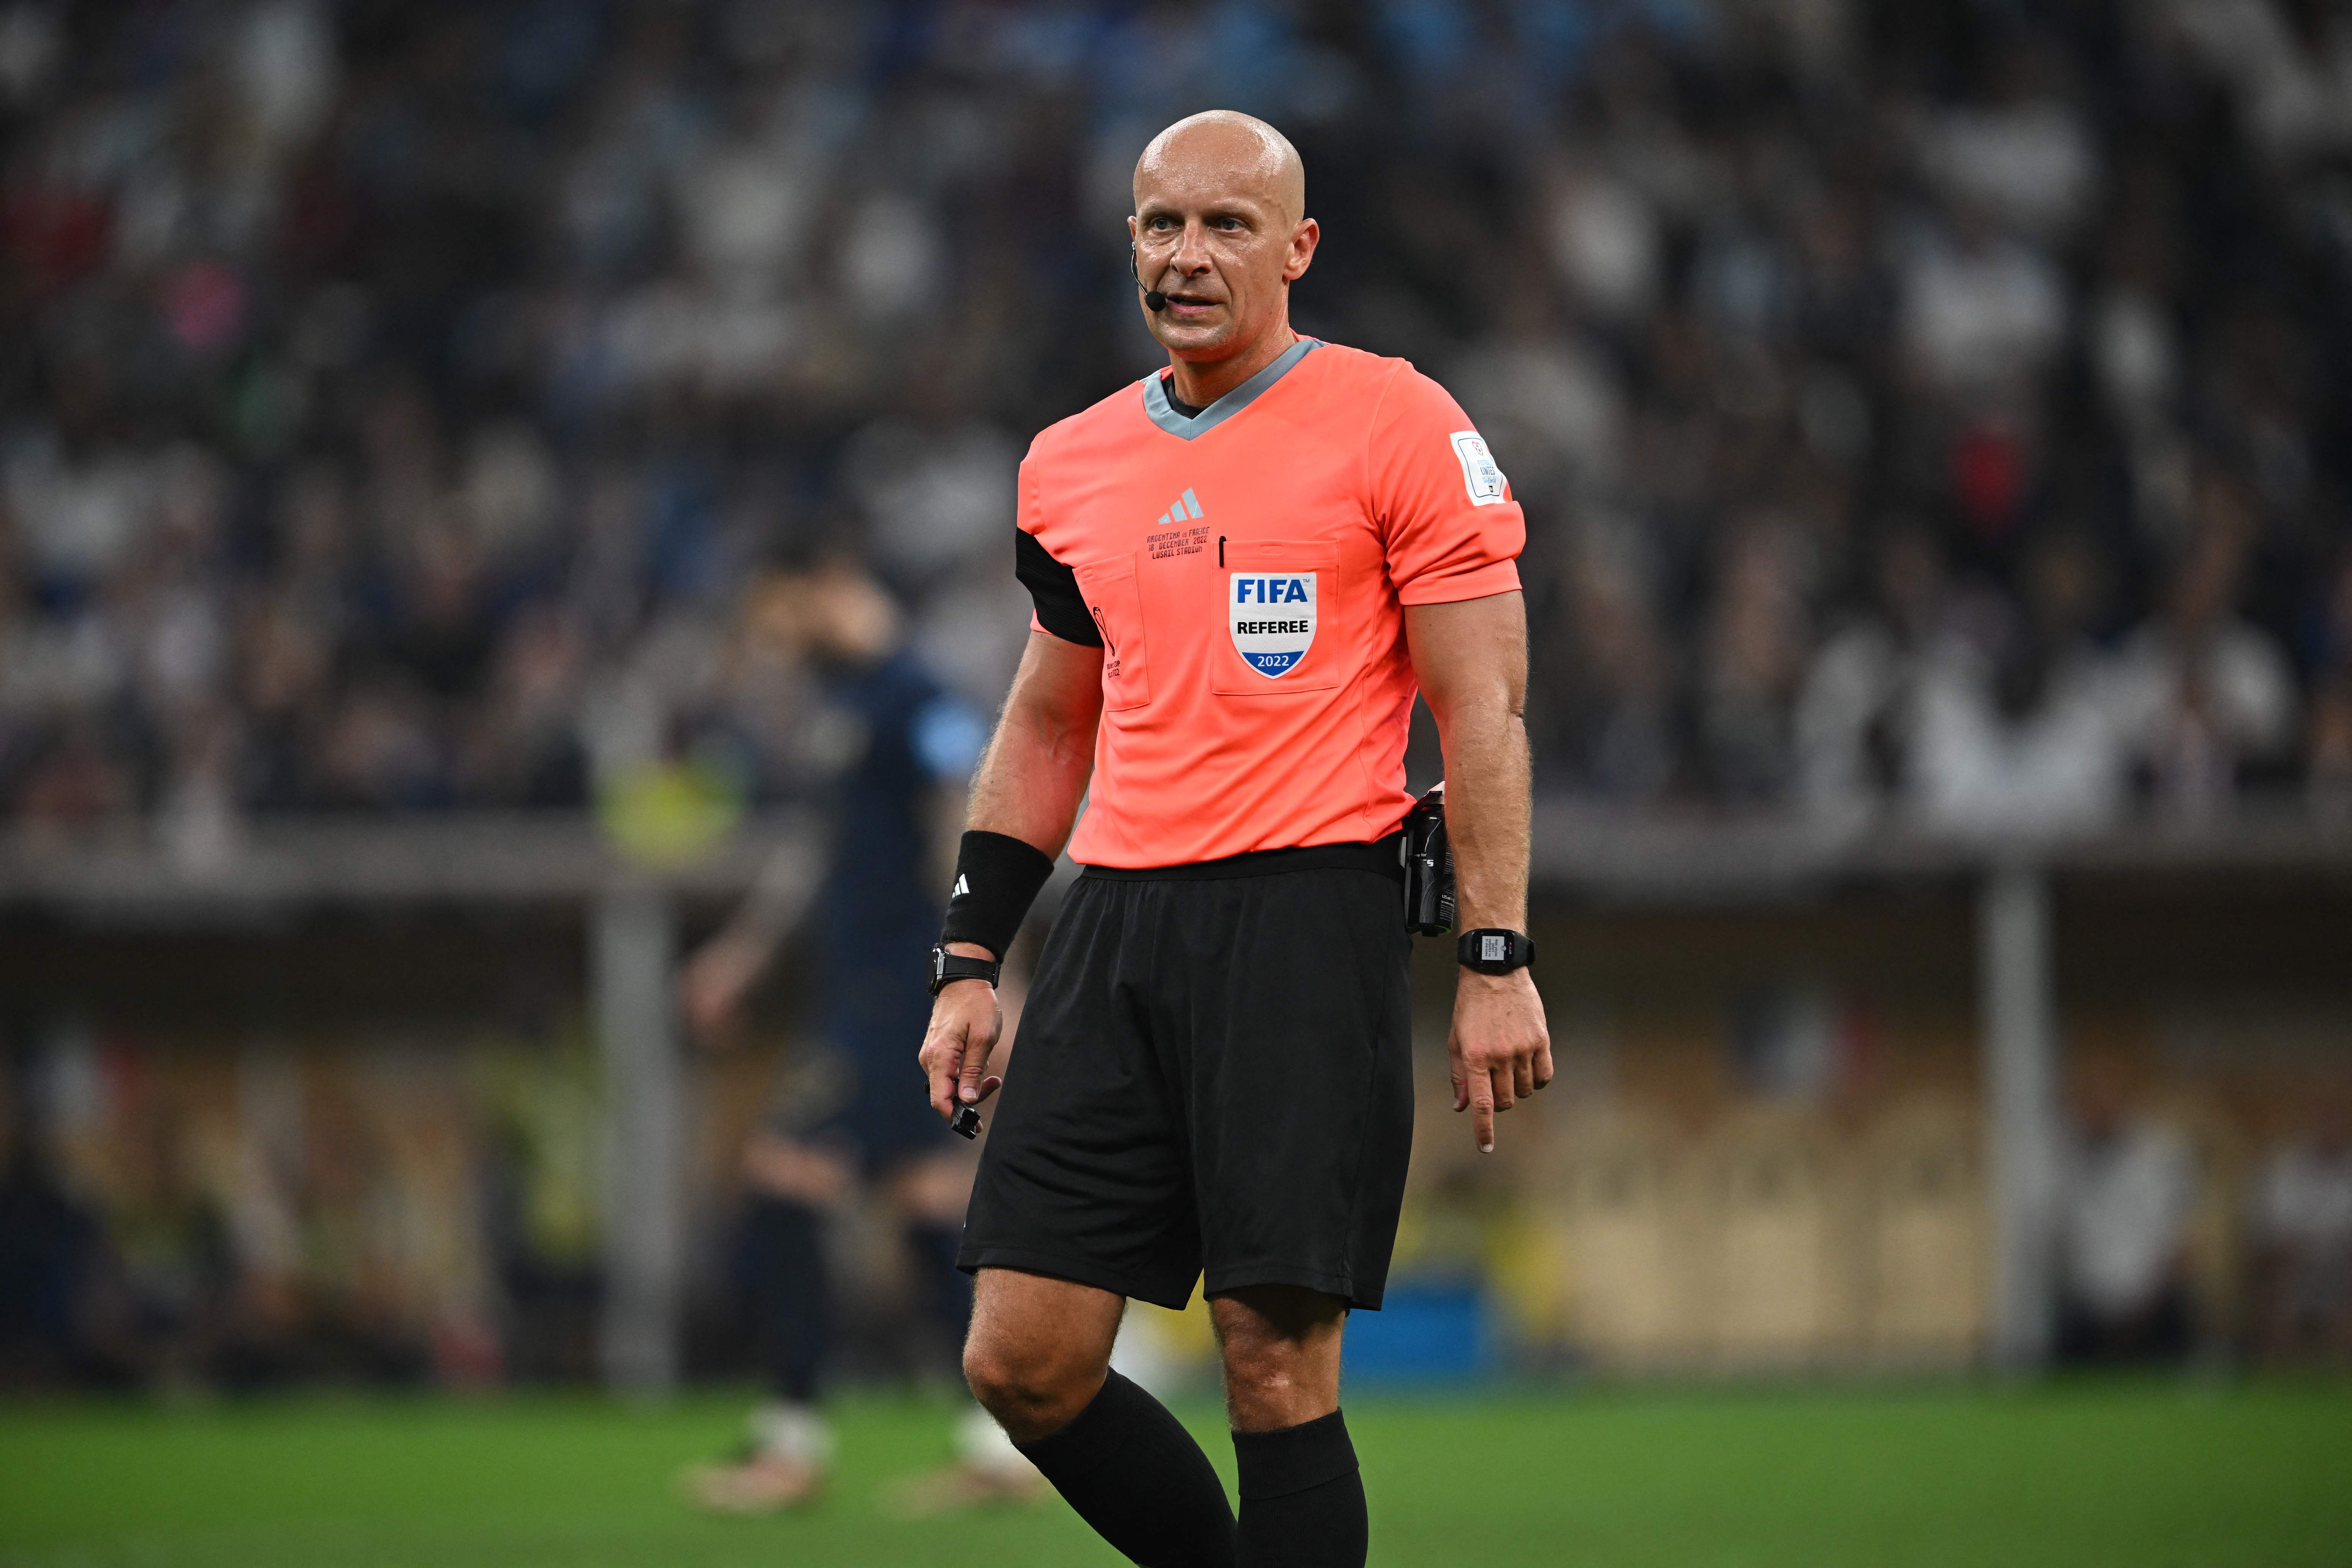 This was the shocking statement of the referee of the final match between Argentina and France in the Qatar 2022 World Cup